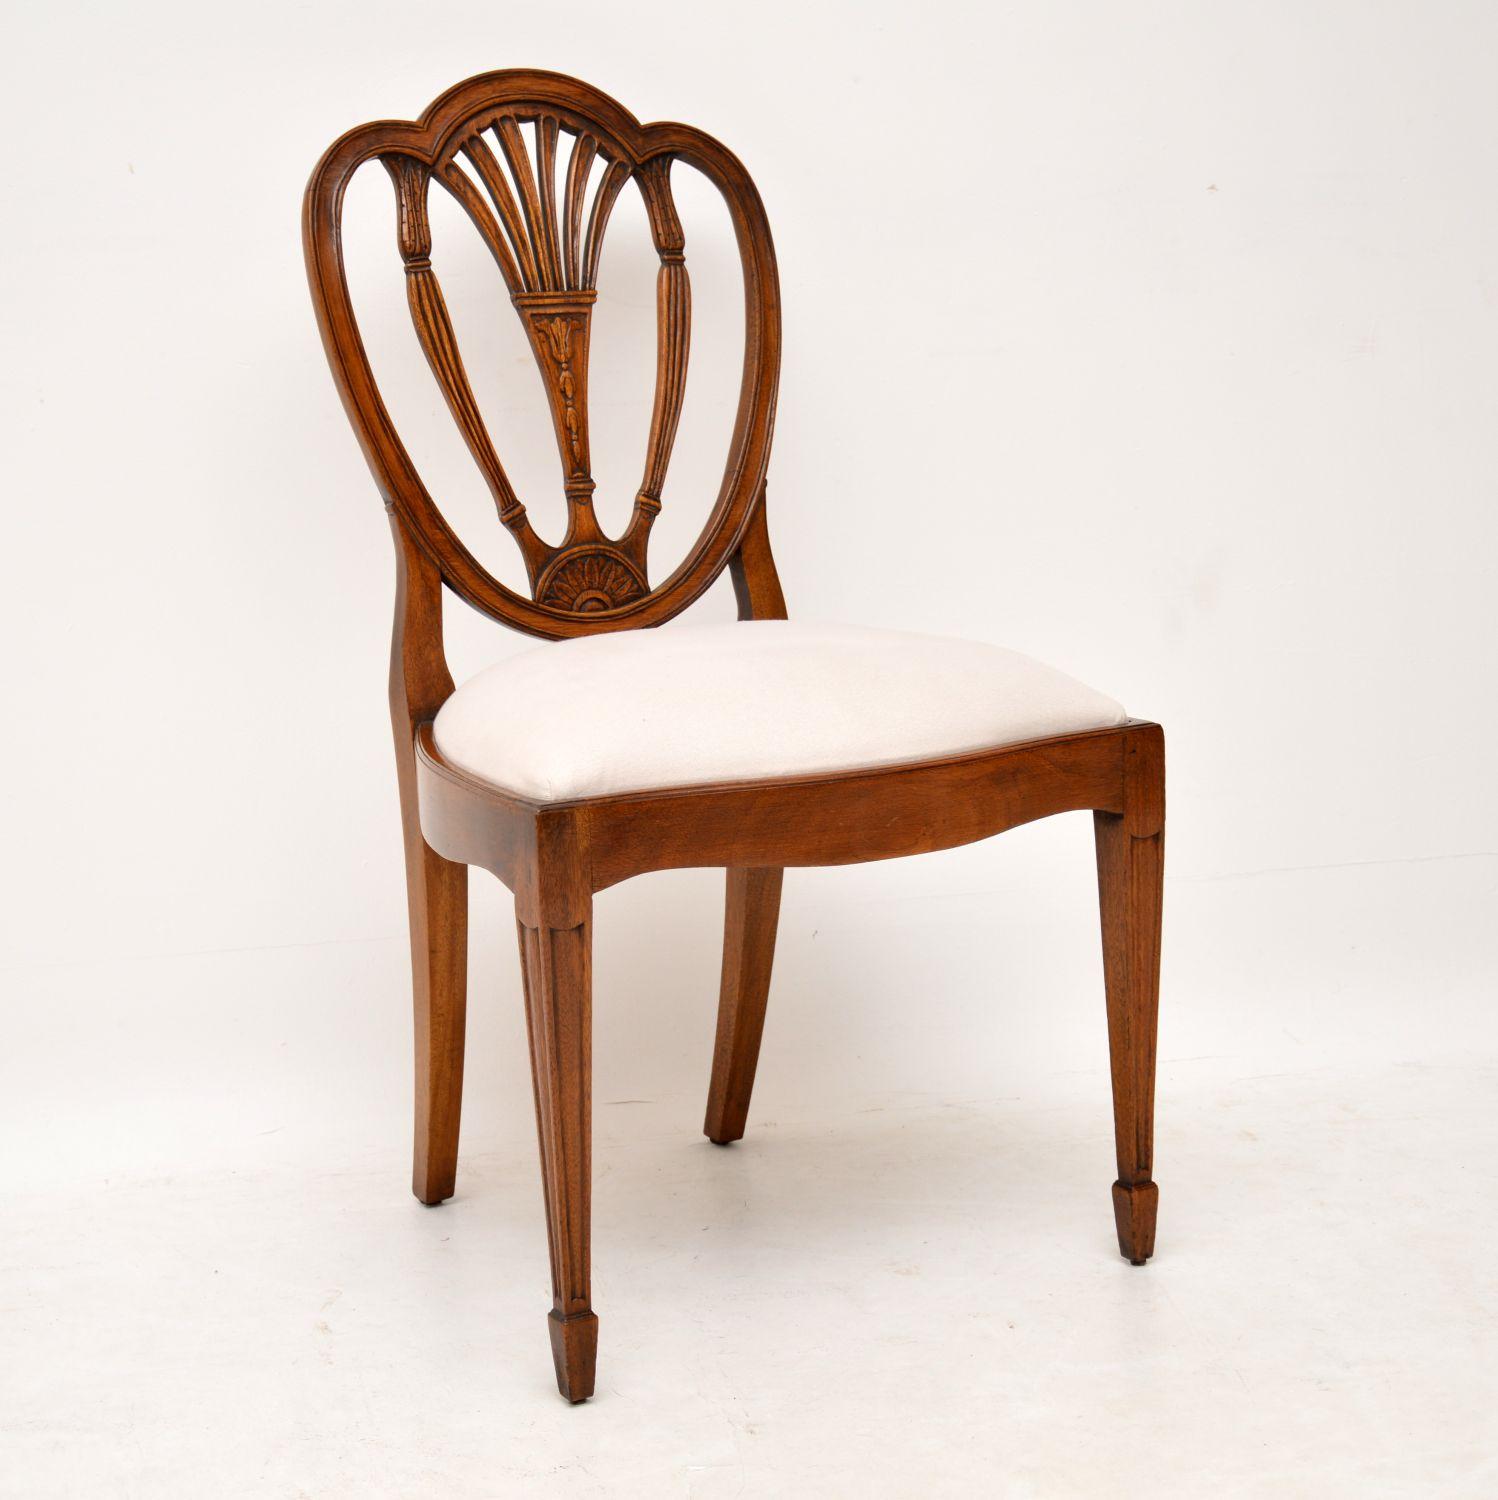 This set of six antique mahogany dining chairs are of high quality and have nicely shaped backs with intricate carvings all over. They are in excellent condition, having just been French polished and have a lovely warm color. The back legs are swept